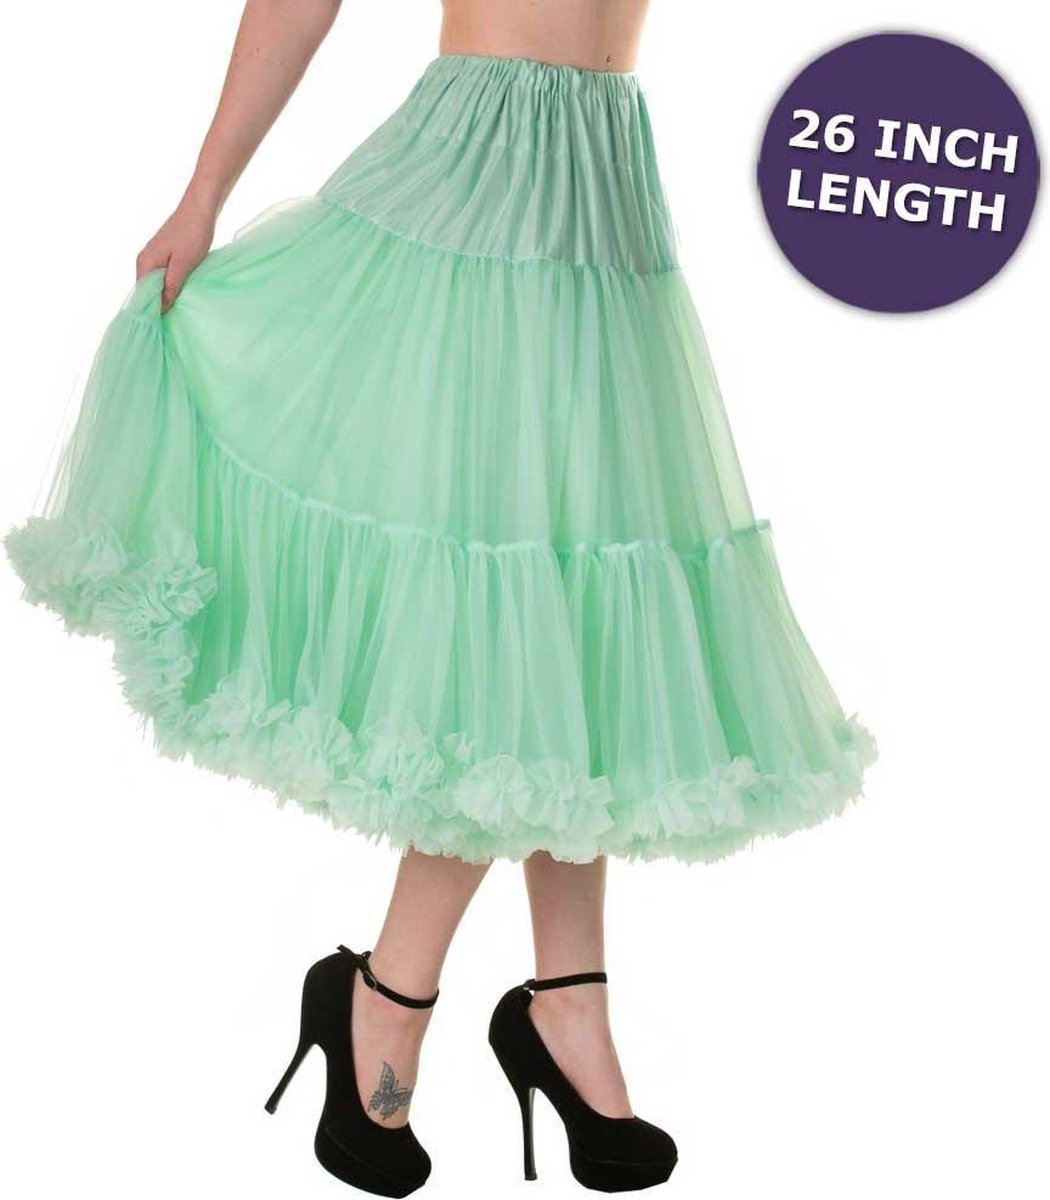 Banned - Lifeforms Petticoat - 26 inch - XS/S - Groen